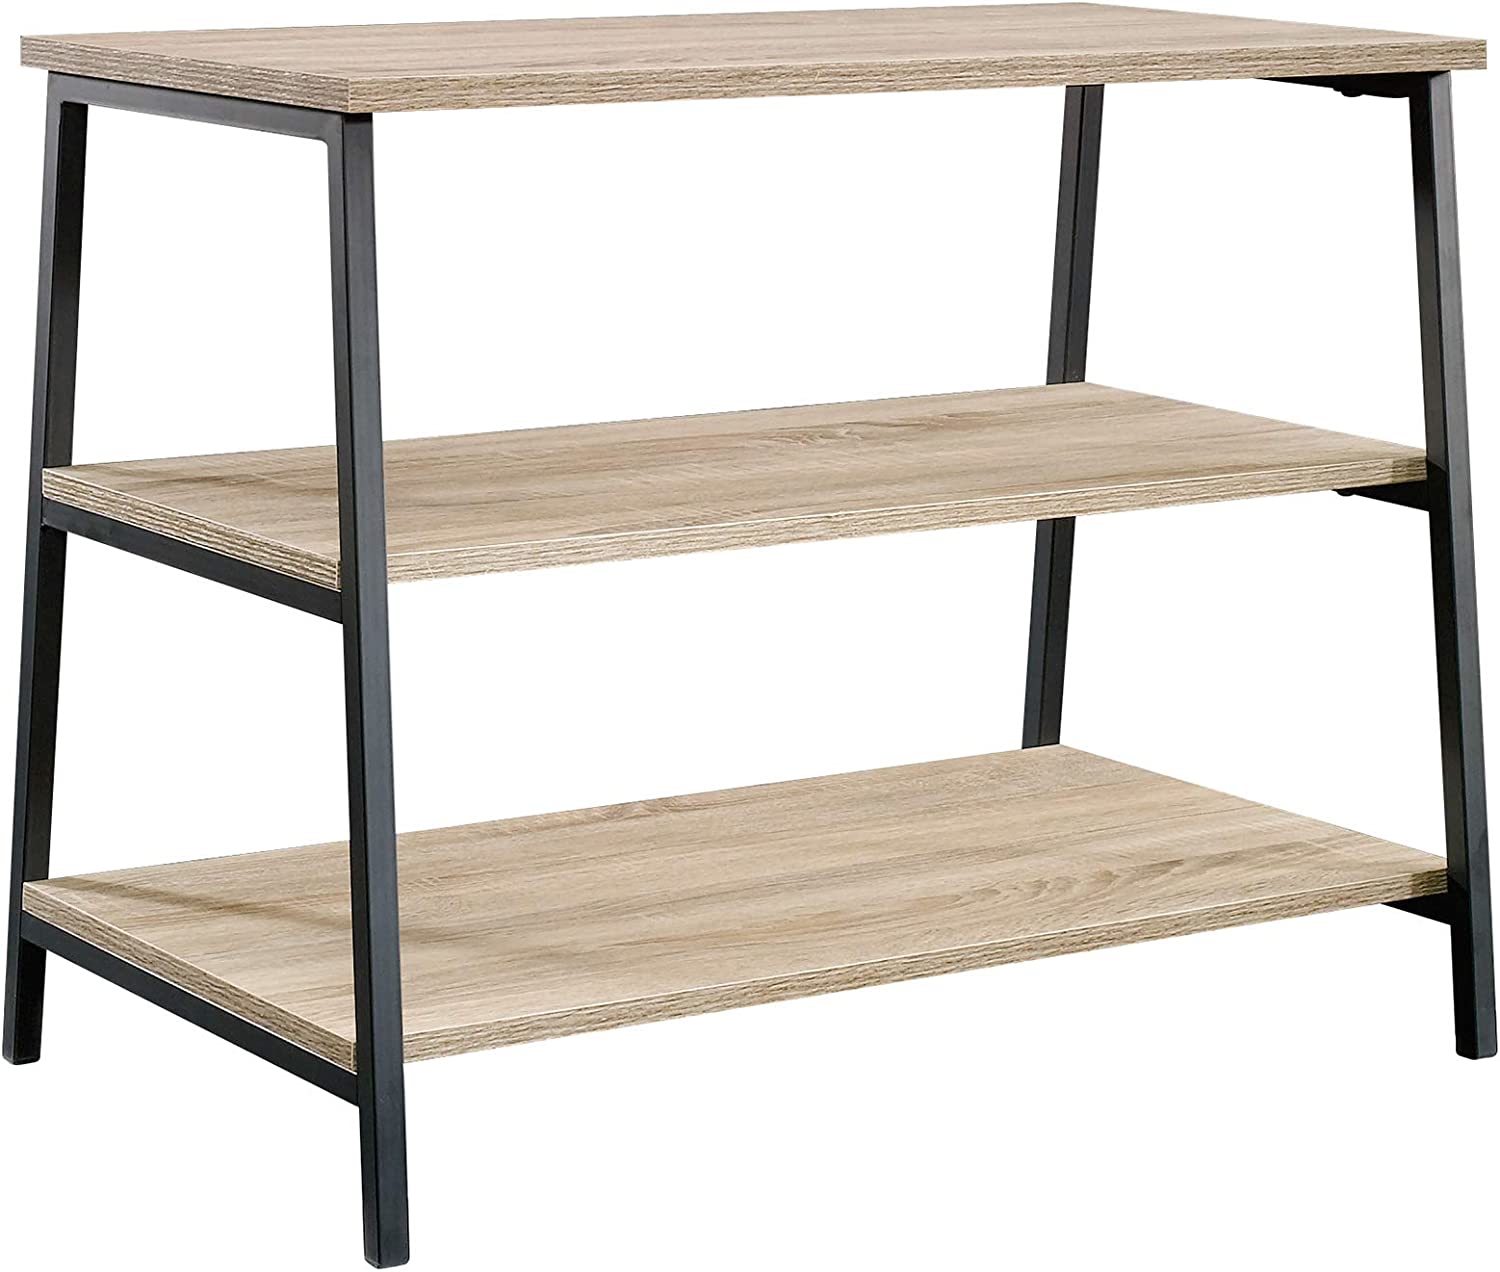 Sauder North Avenue Tv Stand, For Tvs Up To 36", Charter Oak Finish - $71.99